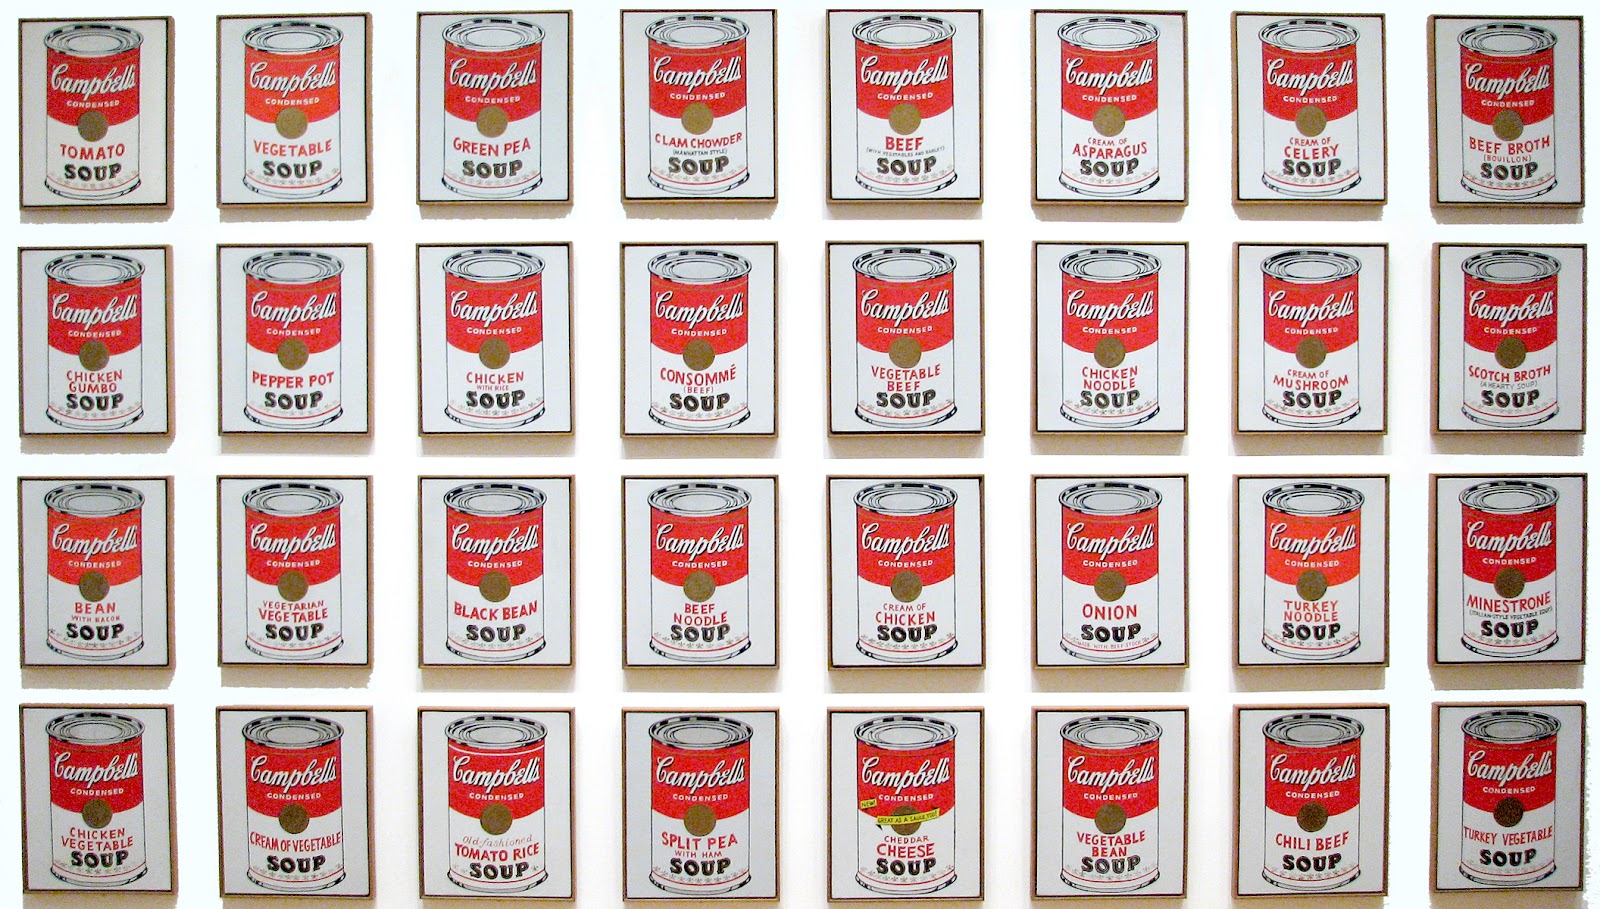 Campbell's Soup Cans by Andy Warhol - 1962 - 50,8 x 40,6 cm Museum of Modern Art